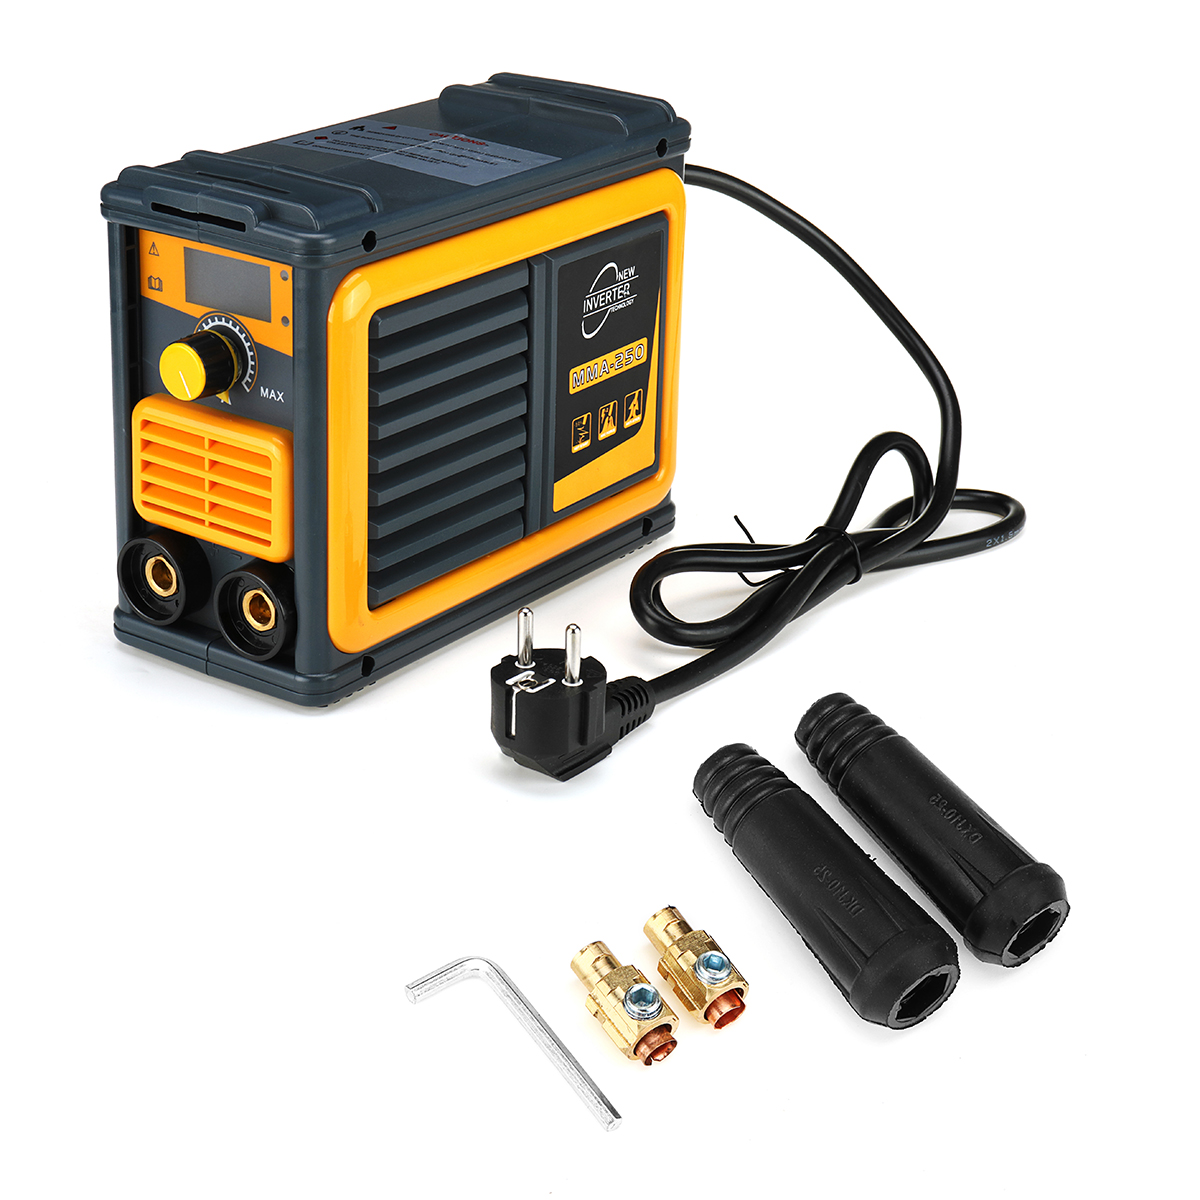 Find 220V 250A Handheld Electric Welder MMA Inverter ARC IGBT Welding Machine Tool for Sale on Gipsybee.com with cryptocurrencies